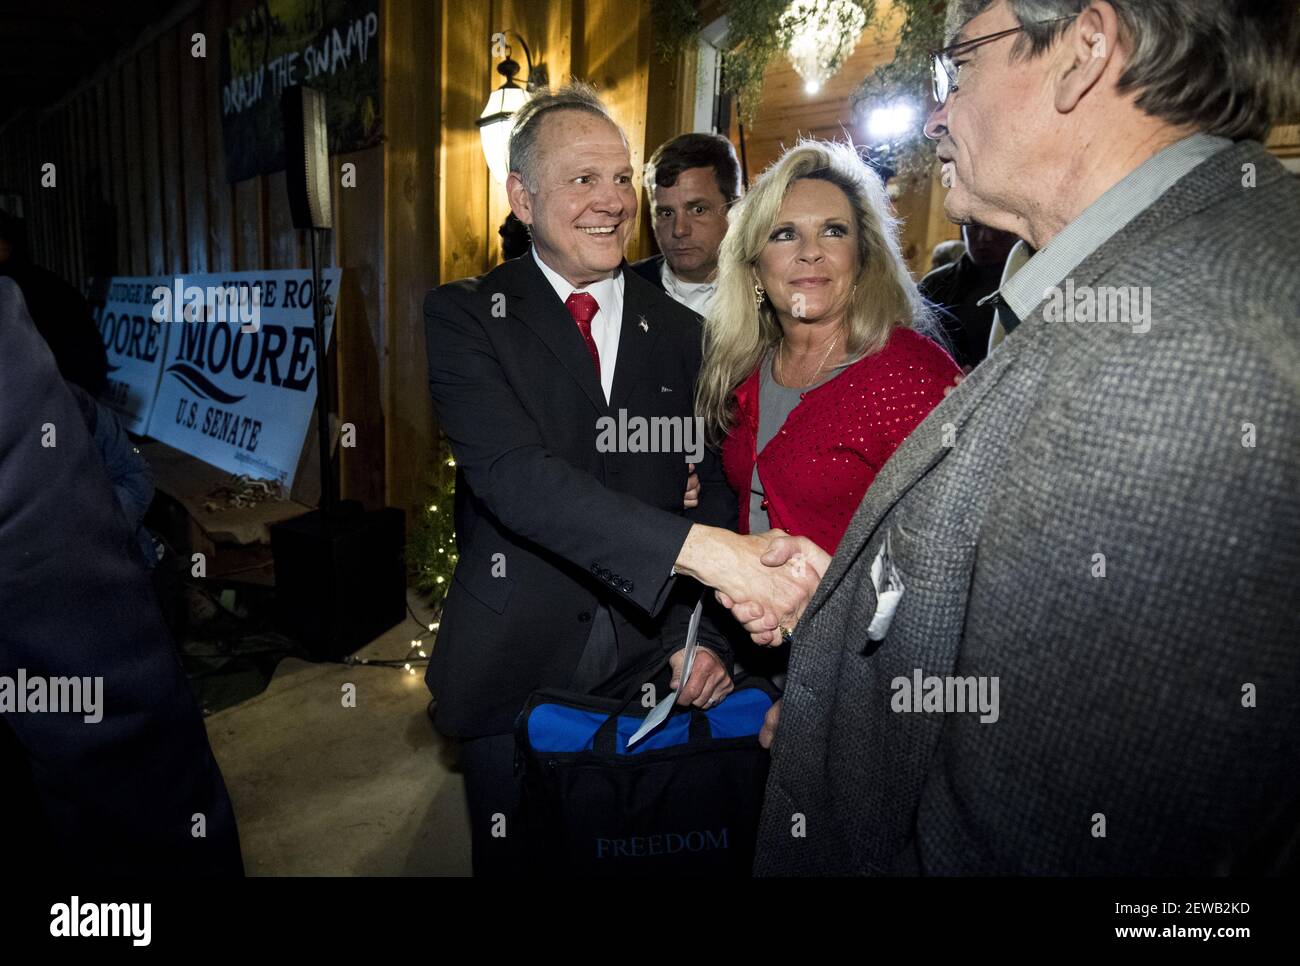 UNITED STATES - DECEMBER 11: Republican Senate candidate Roy Moore, left, and his wife Kayla leave Moore's 'Drain the Swamp' rally in Midland City, Ala., on Monday, Dec. 11, 2017. (Photo By Bill Clark/CQ Roll Call) Stock Photo